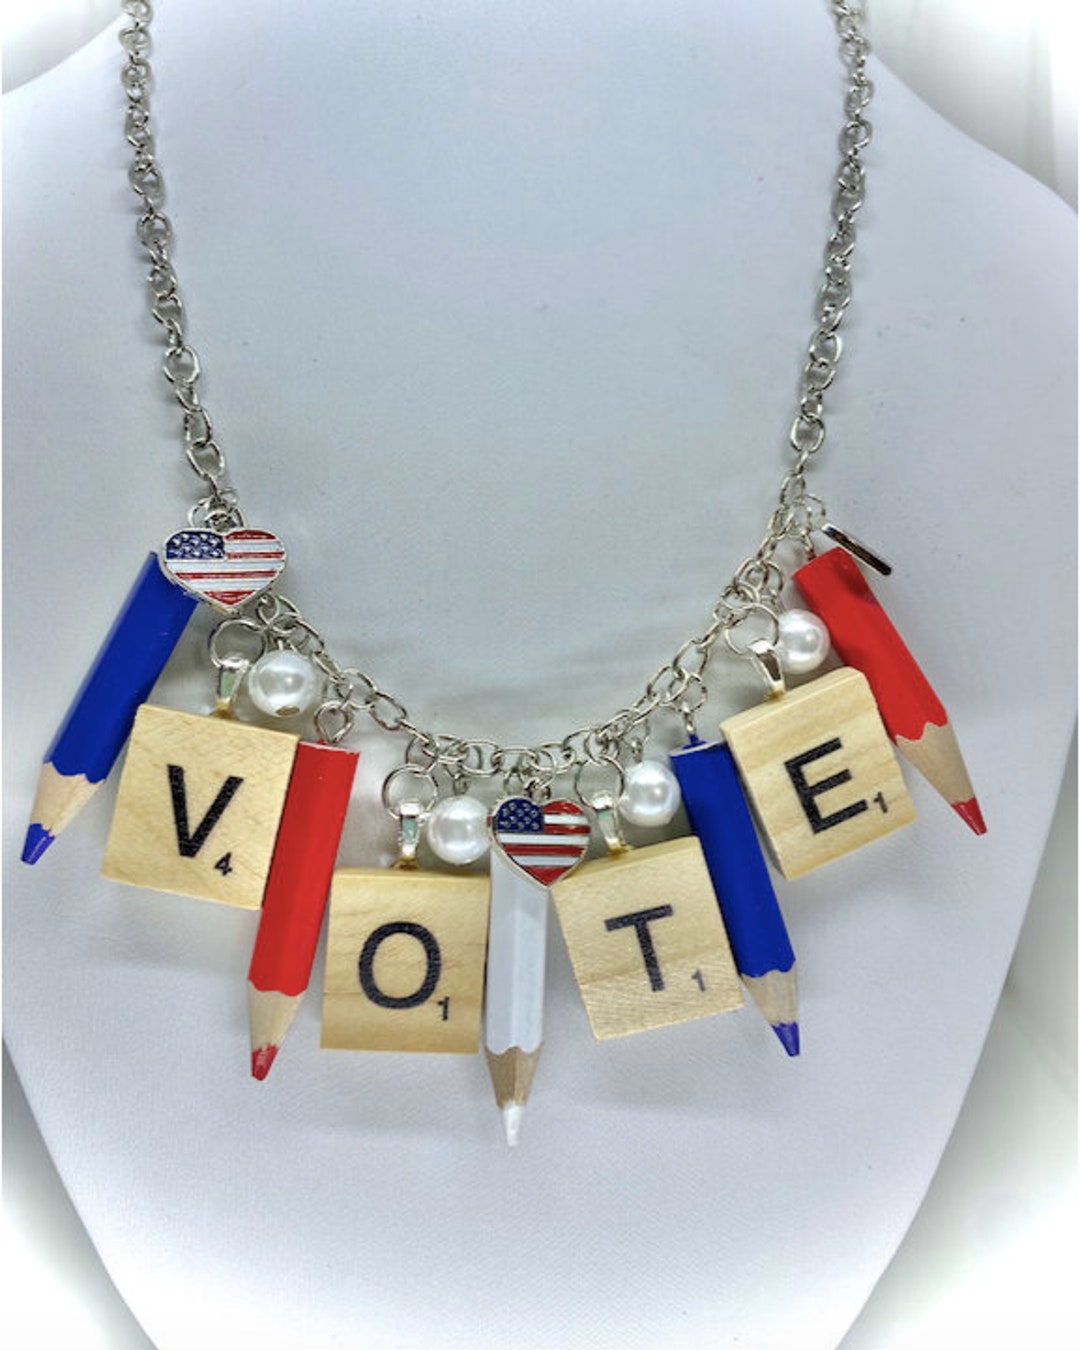 Buy Junkin 50 Pcs 4th of July Light up Necklace Bulk Include 25 Light up  Heart Necklace and 25 Led Patriotic Star Bead Necklace Red Blue Fourth of  July Glow Necklaces for